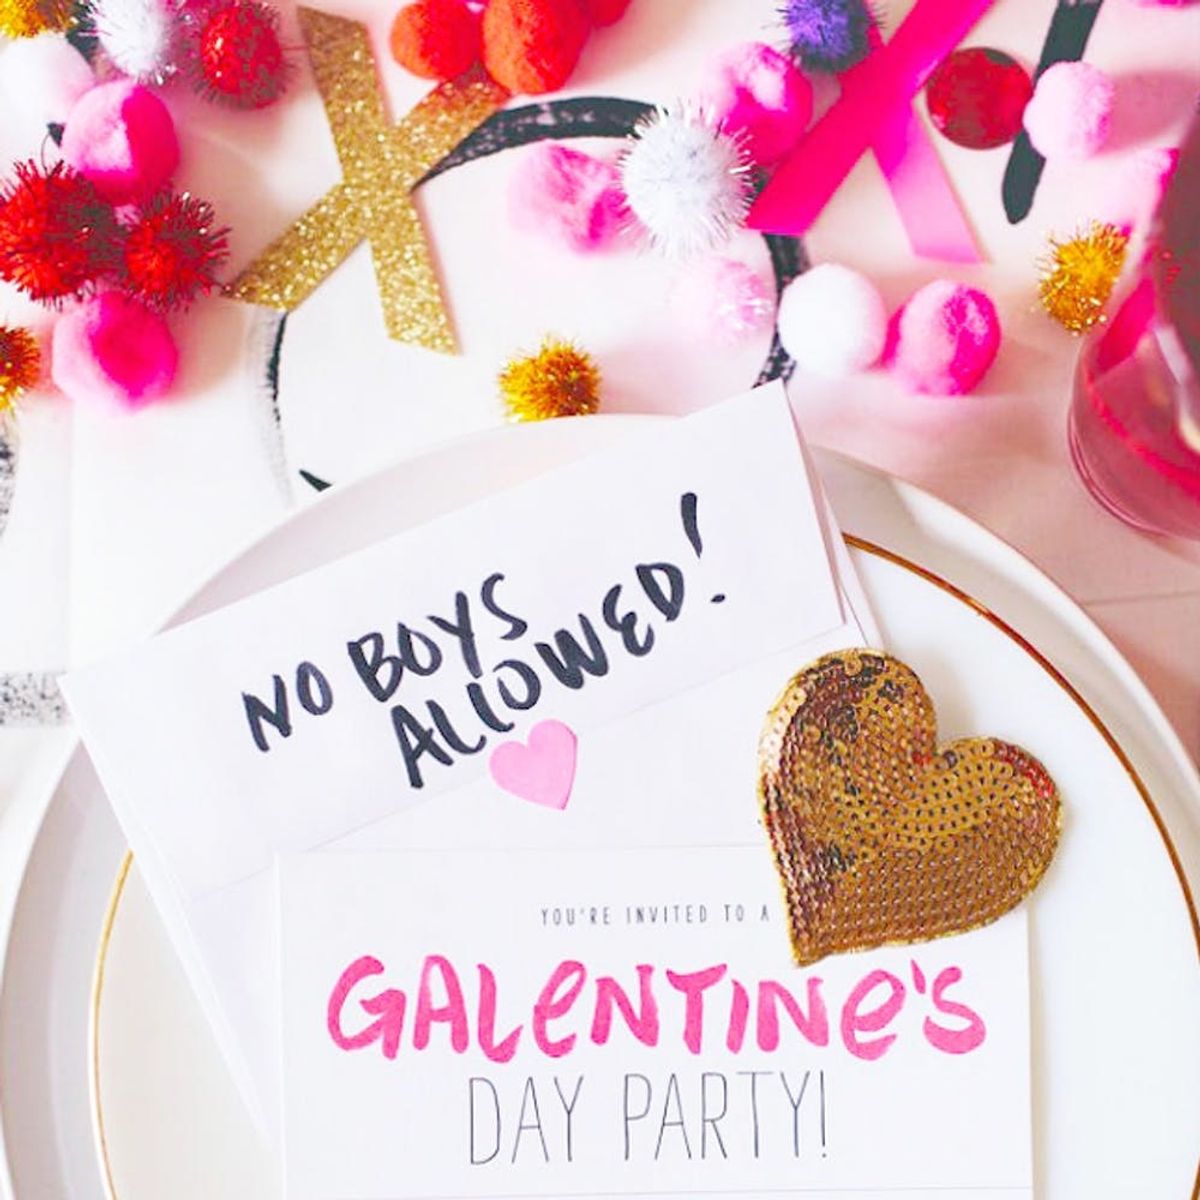 19 Red + Pink Party Ideas for Your Galentine’s Day Party